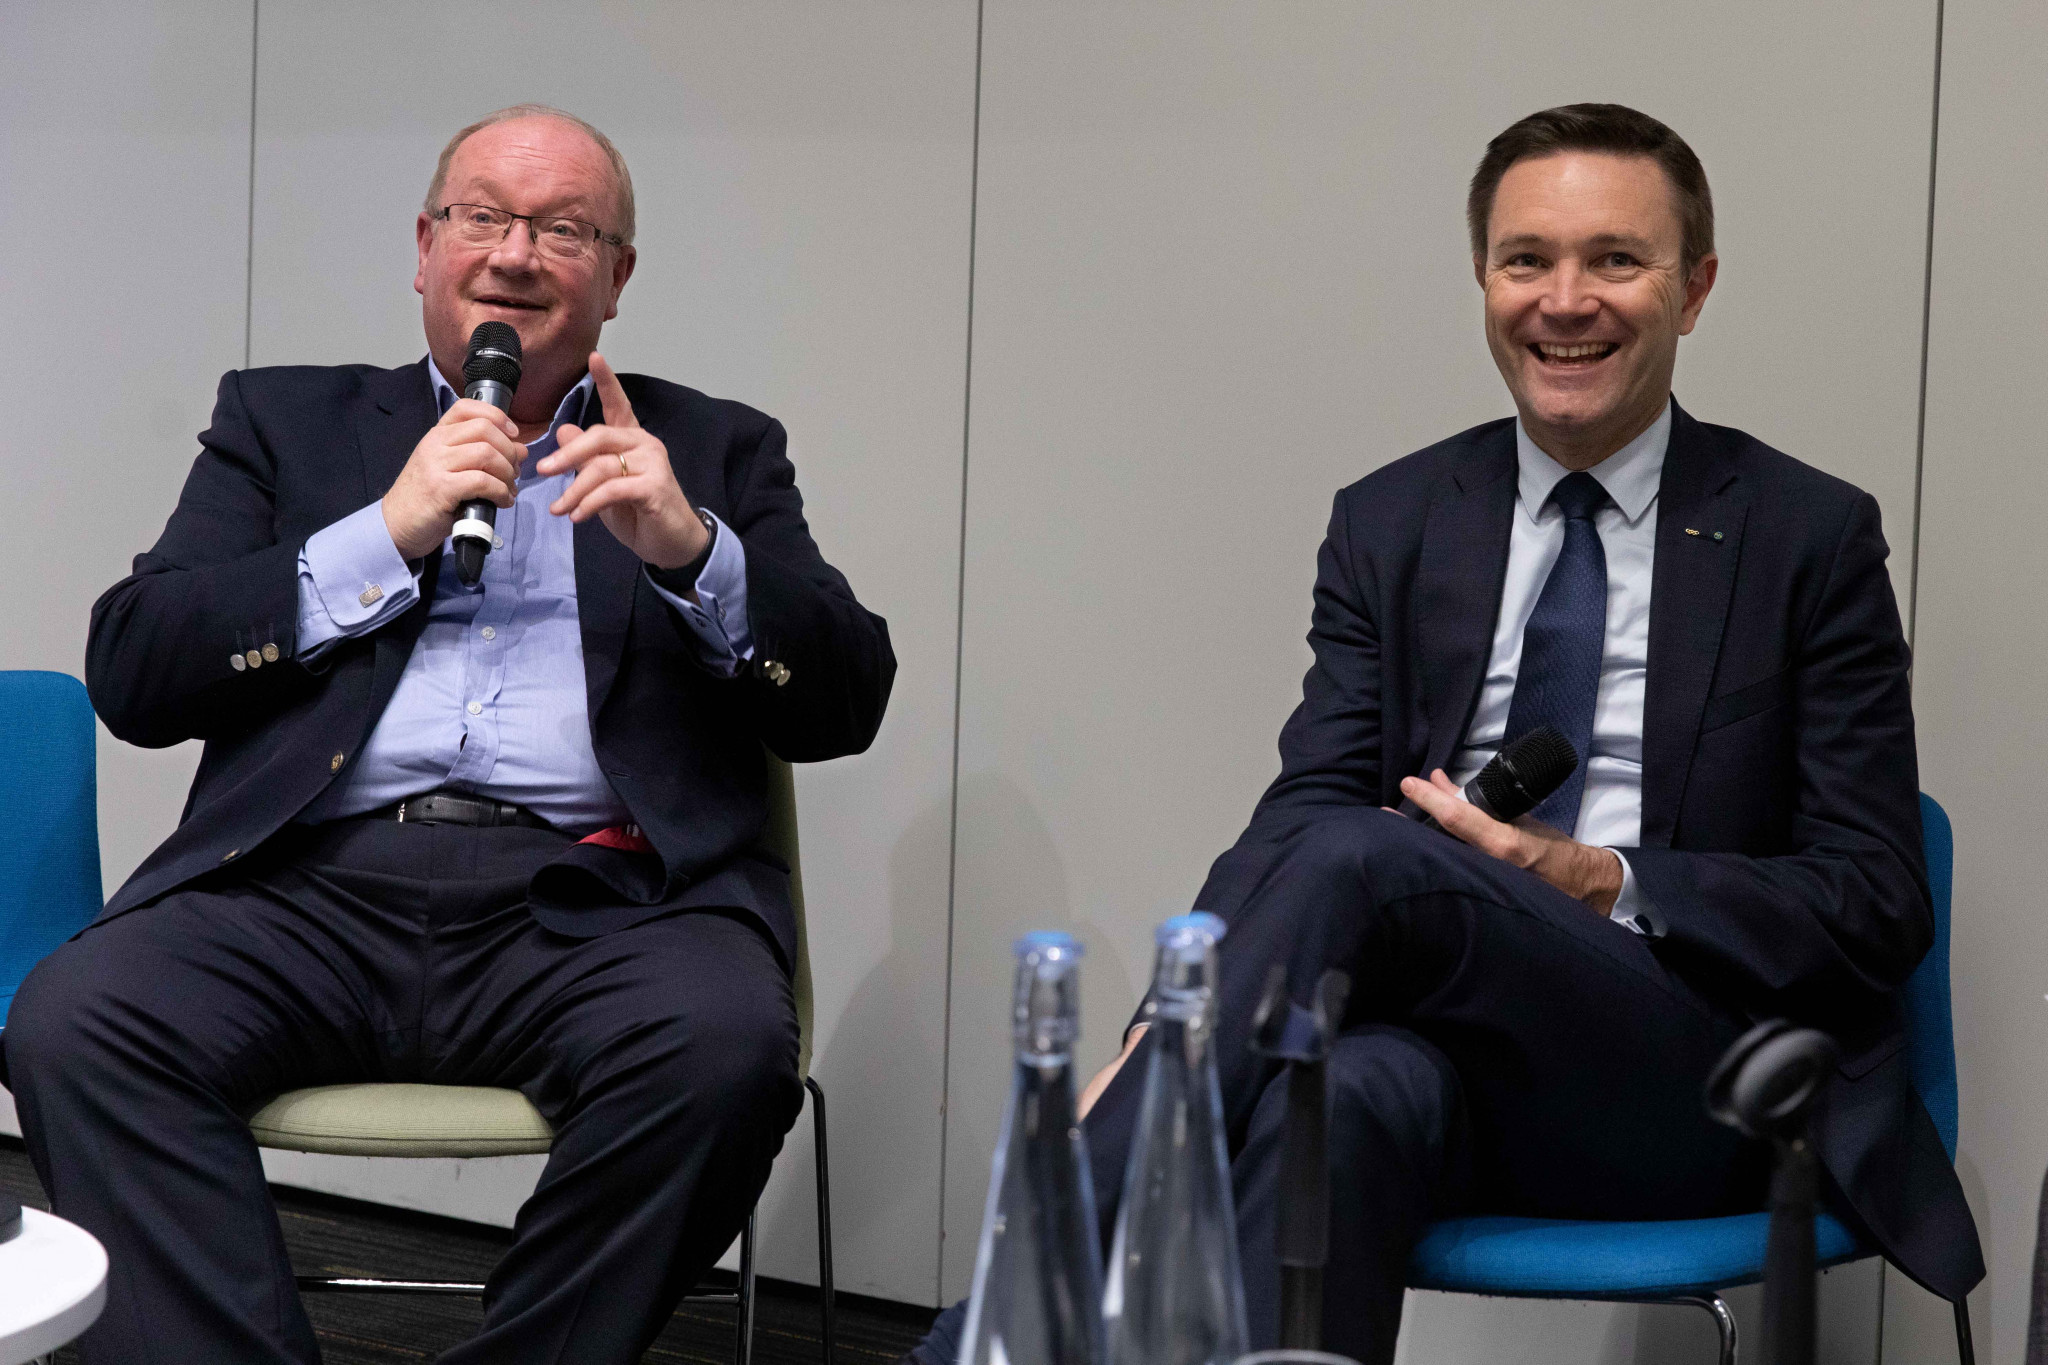 David Lappartient, right, was in Glasgow to attend the Host City 2022 Conference and Exhibition ©Rob Lindblade